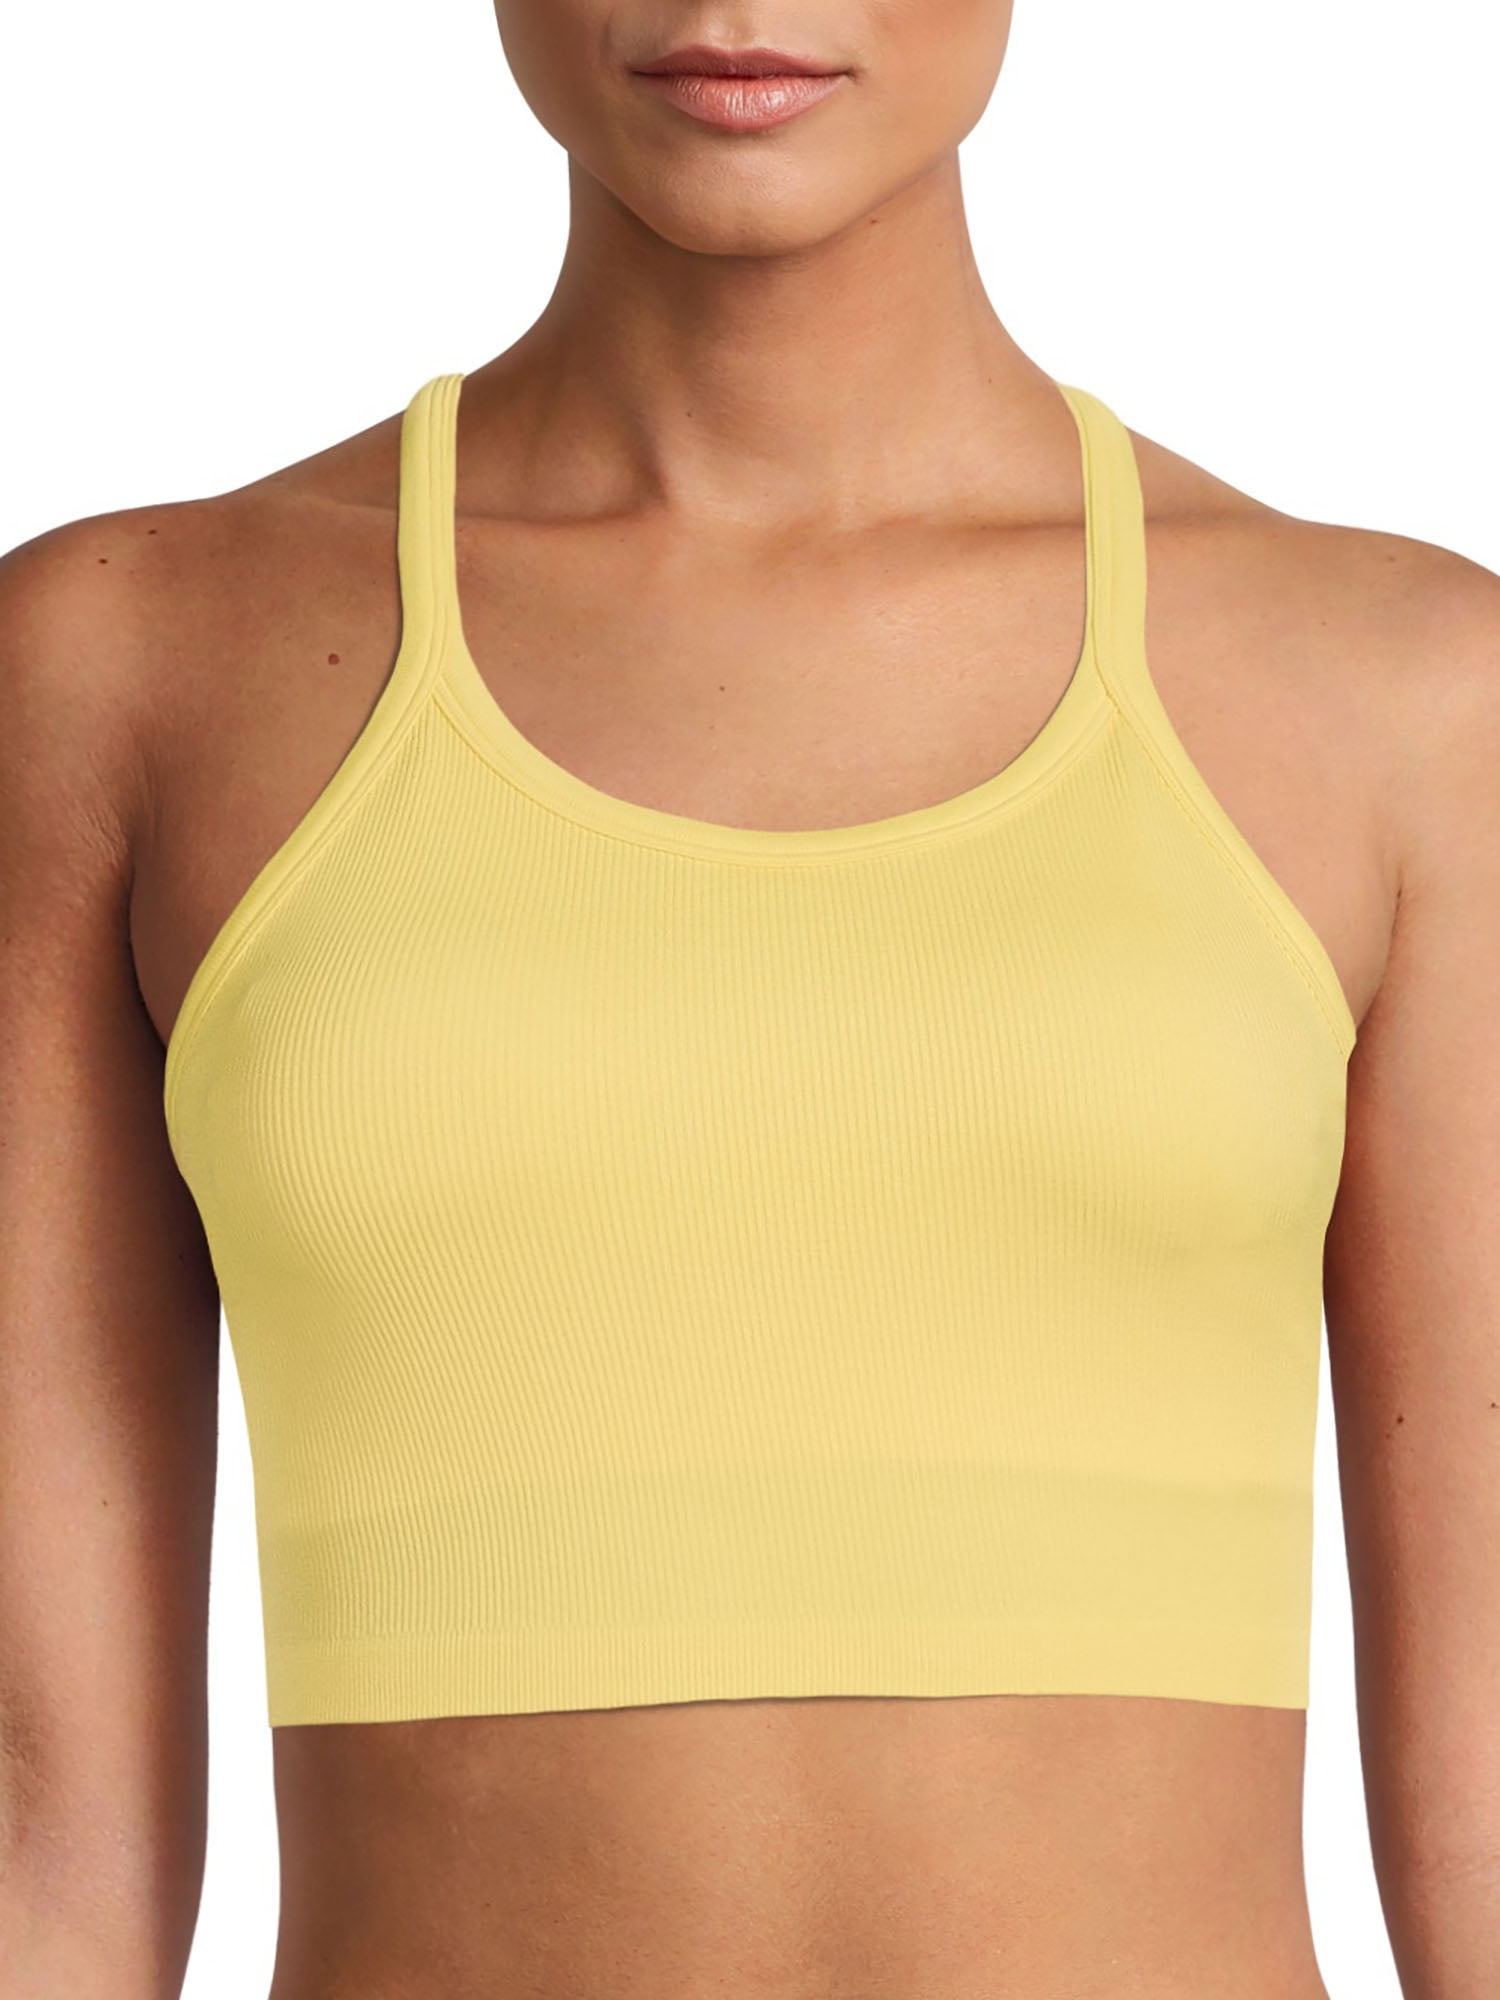 ZEO-LINE Light Weight Close-Fit Cami Top With Bra, Activity, ONLINE SHOP